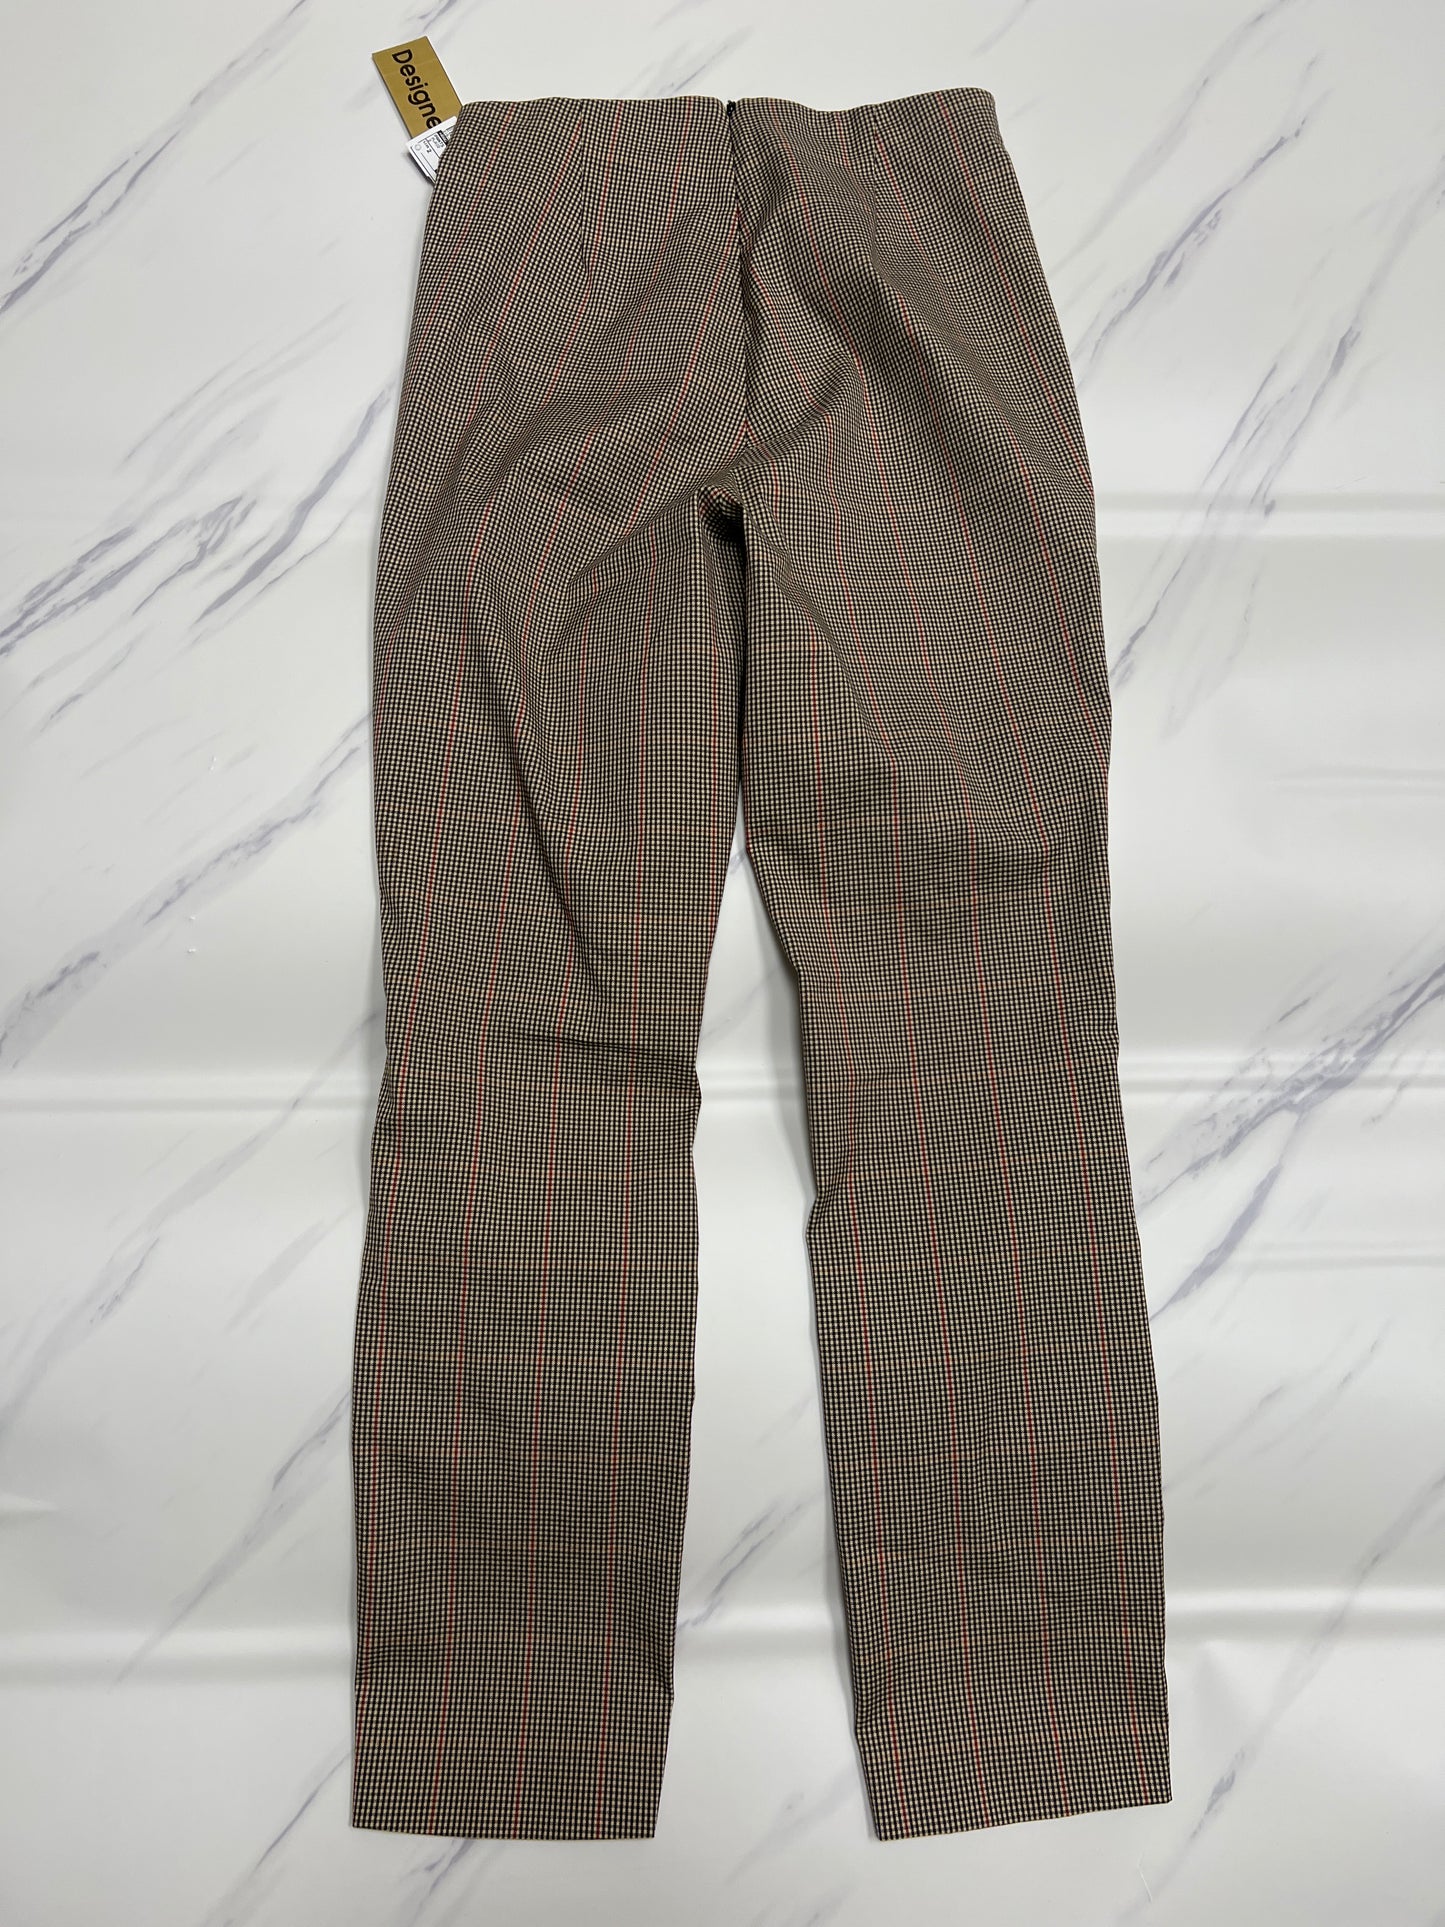 Pants Designer By Rag And Bone  Size: 2